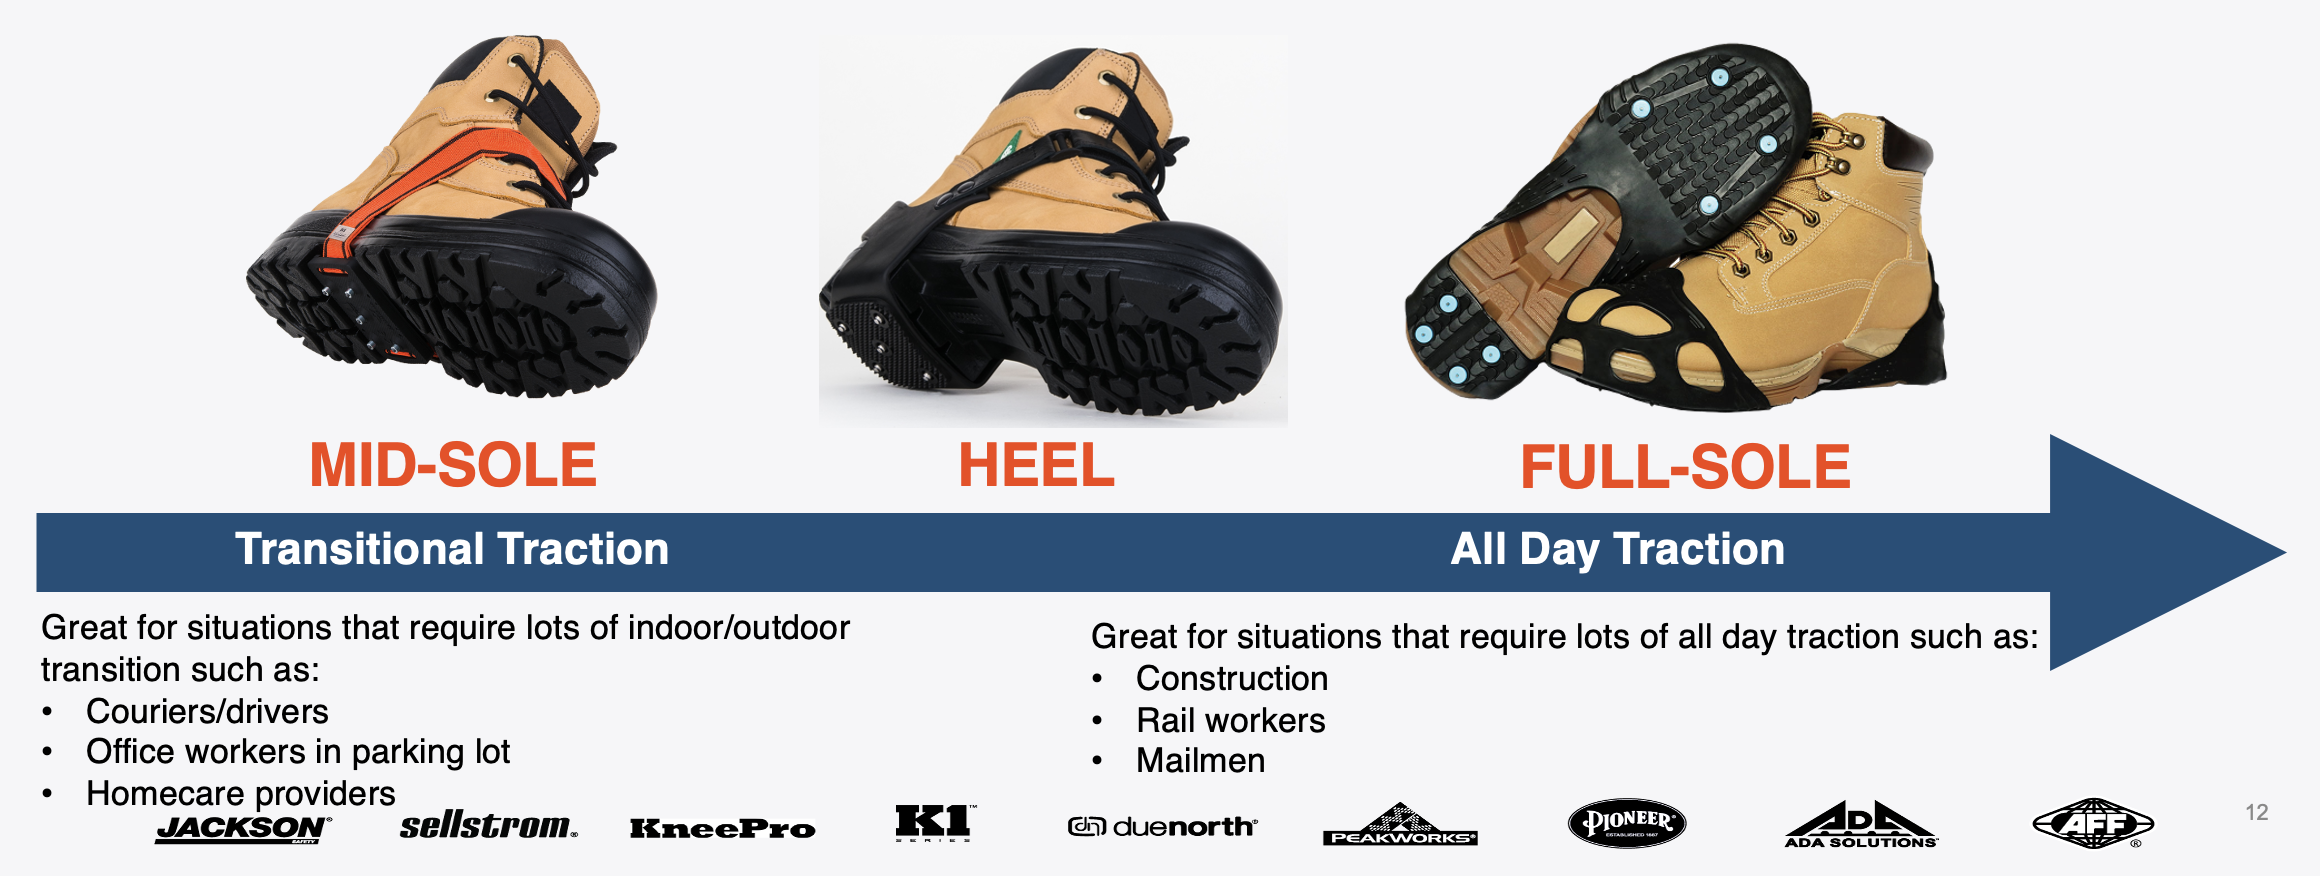 SureWerx’s mid-sole, heel and full-sole traction options. (Image courtesy of SureWerx)